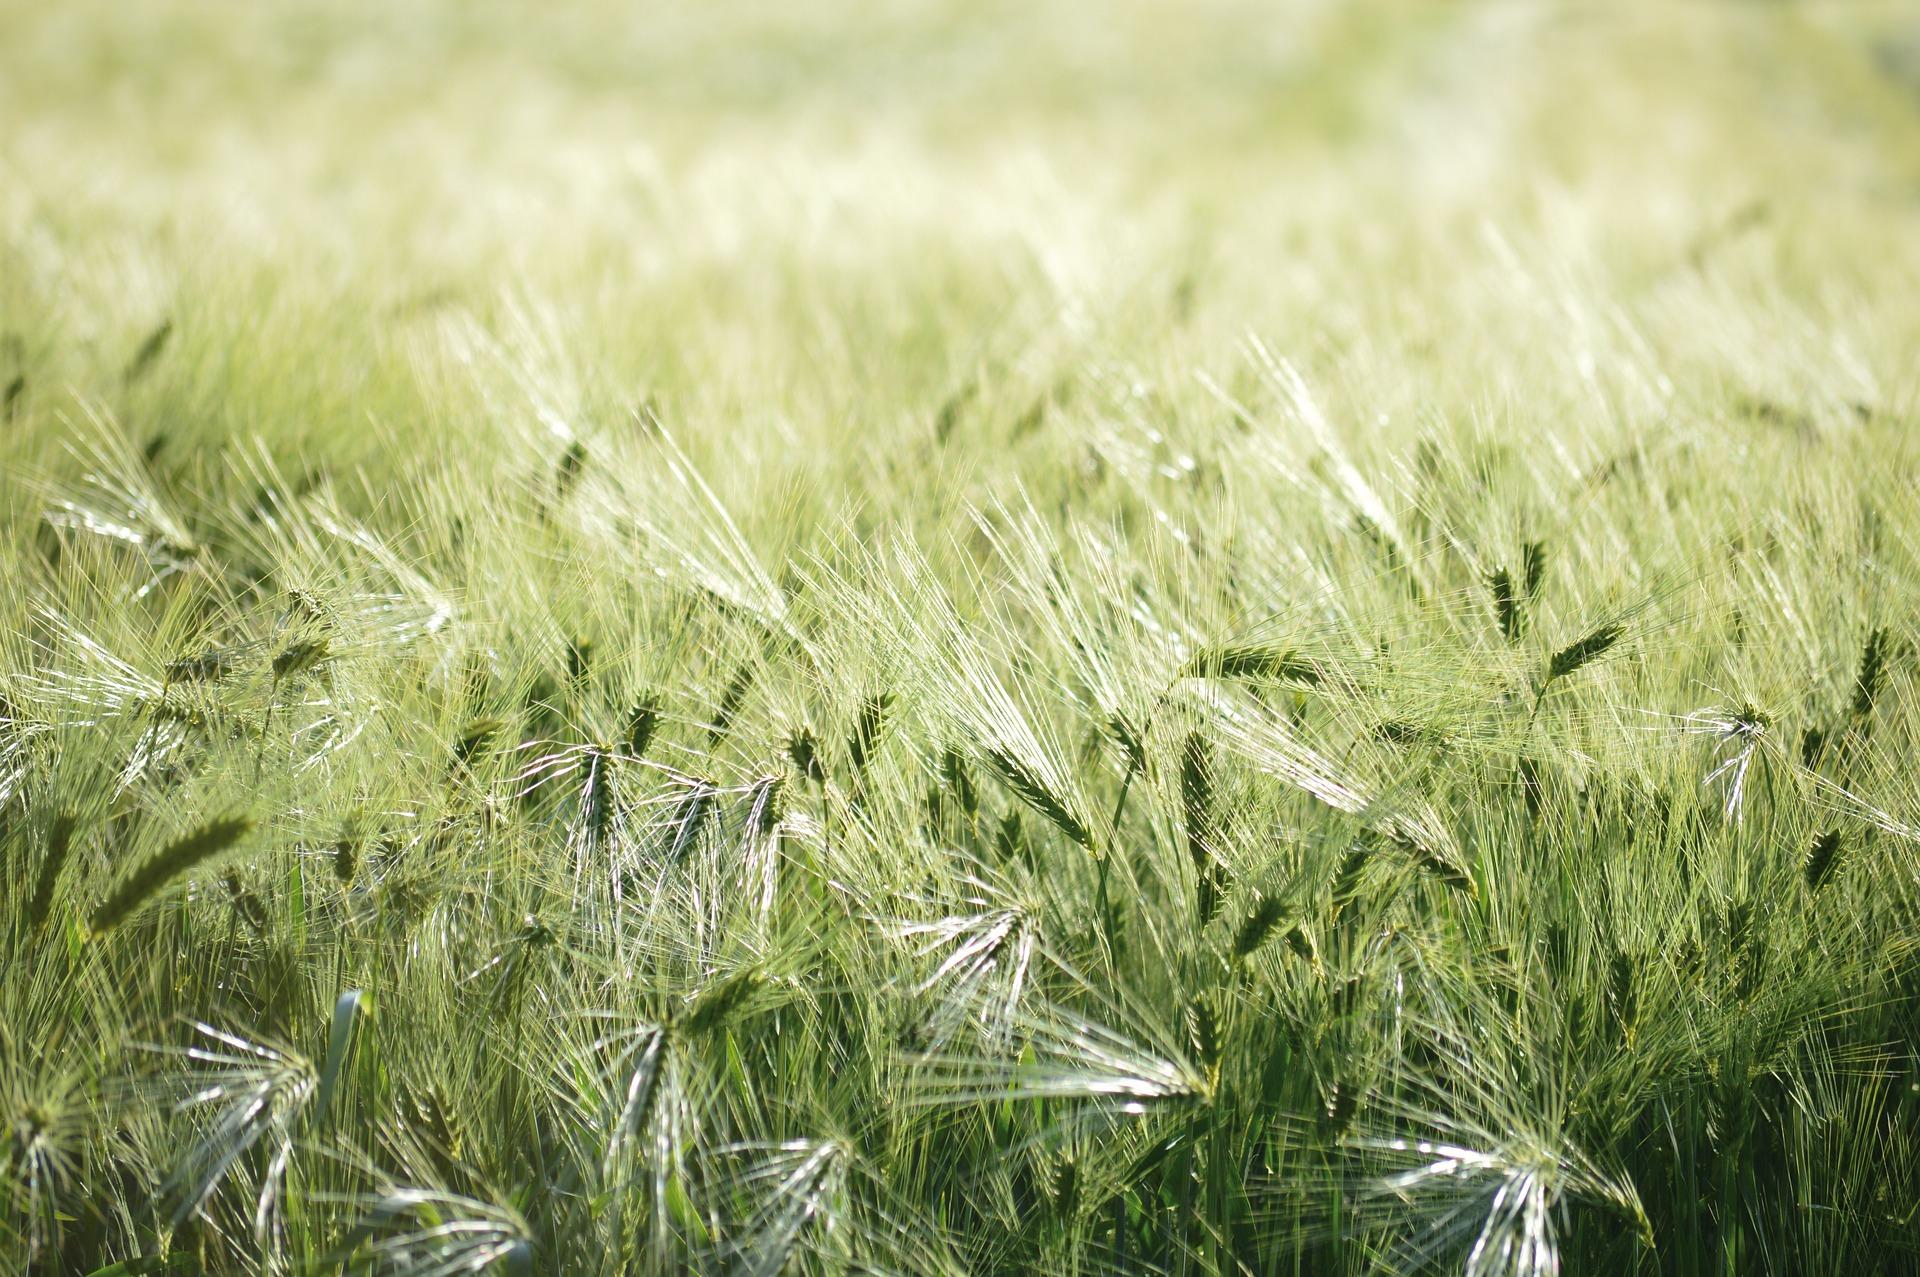 Image of wheat in a field